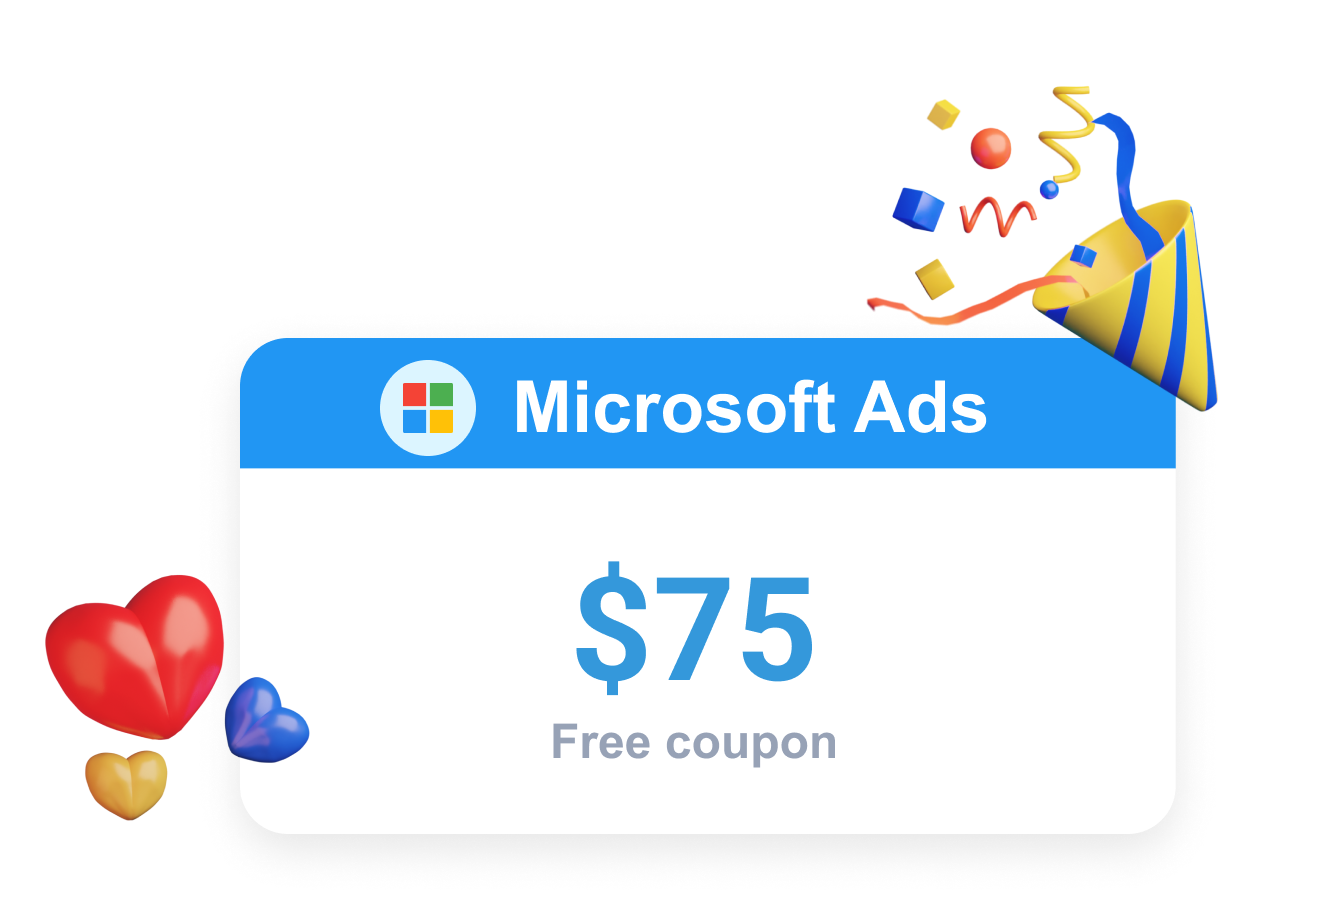 Clever Ads offers a Microsoft Ads Promo in the form of a Bing Ads free coupon